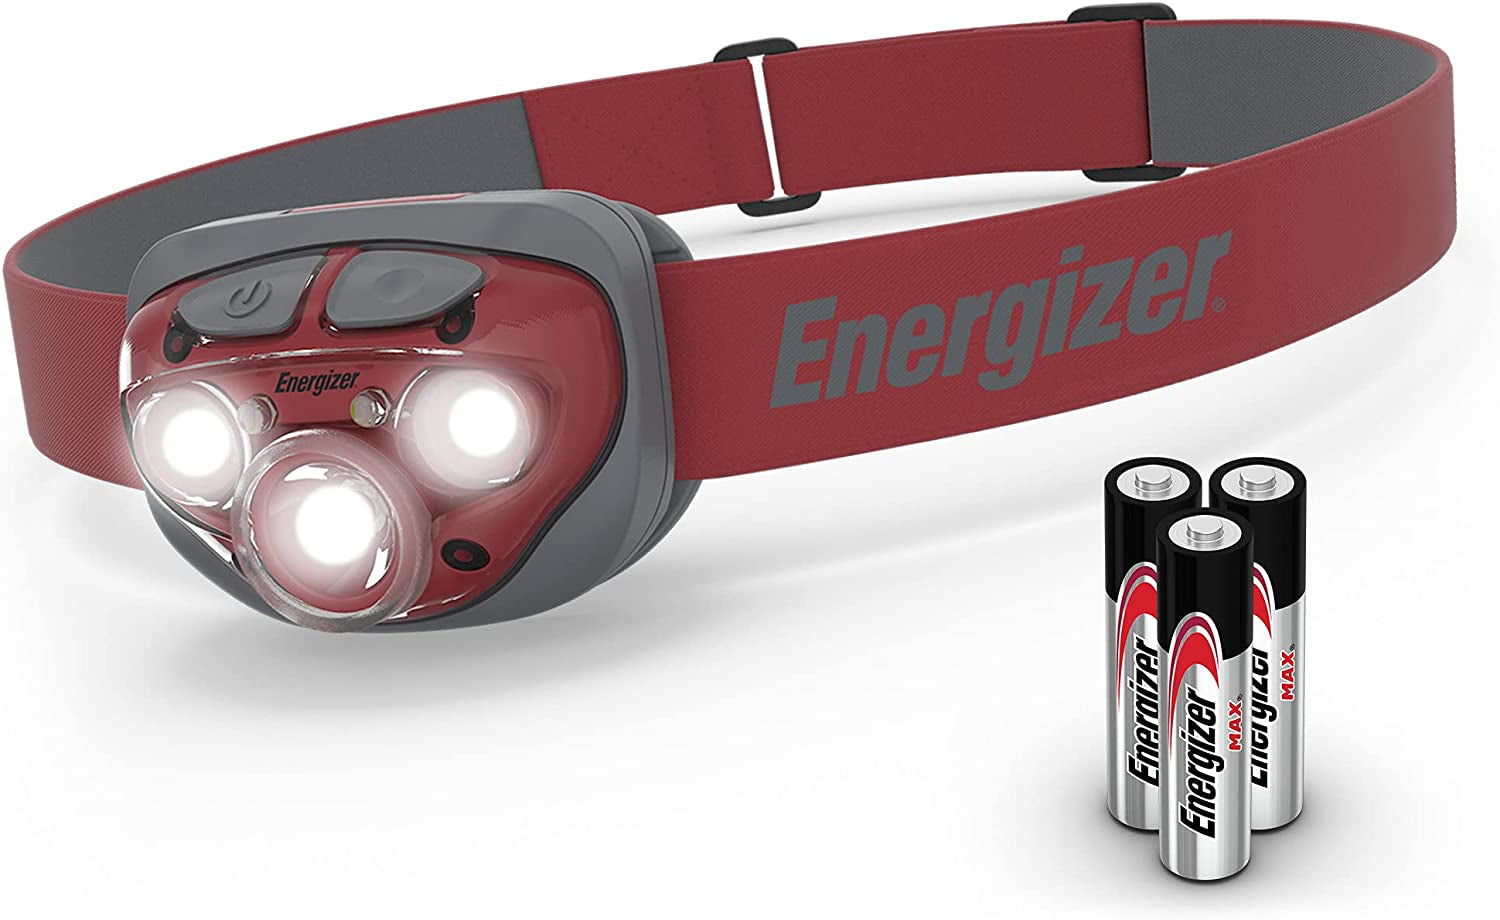 Energizer, Energizer LED Headlamp, Bright and Durable, Lightweight, Built for Camping, Hiking, Outdoors, Emergency Light, Best Head Lamp for Adults and Kids, Batteries Included